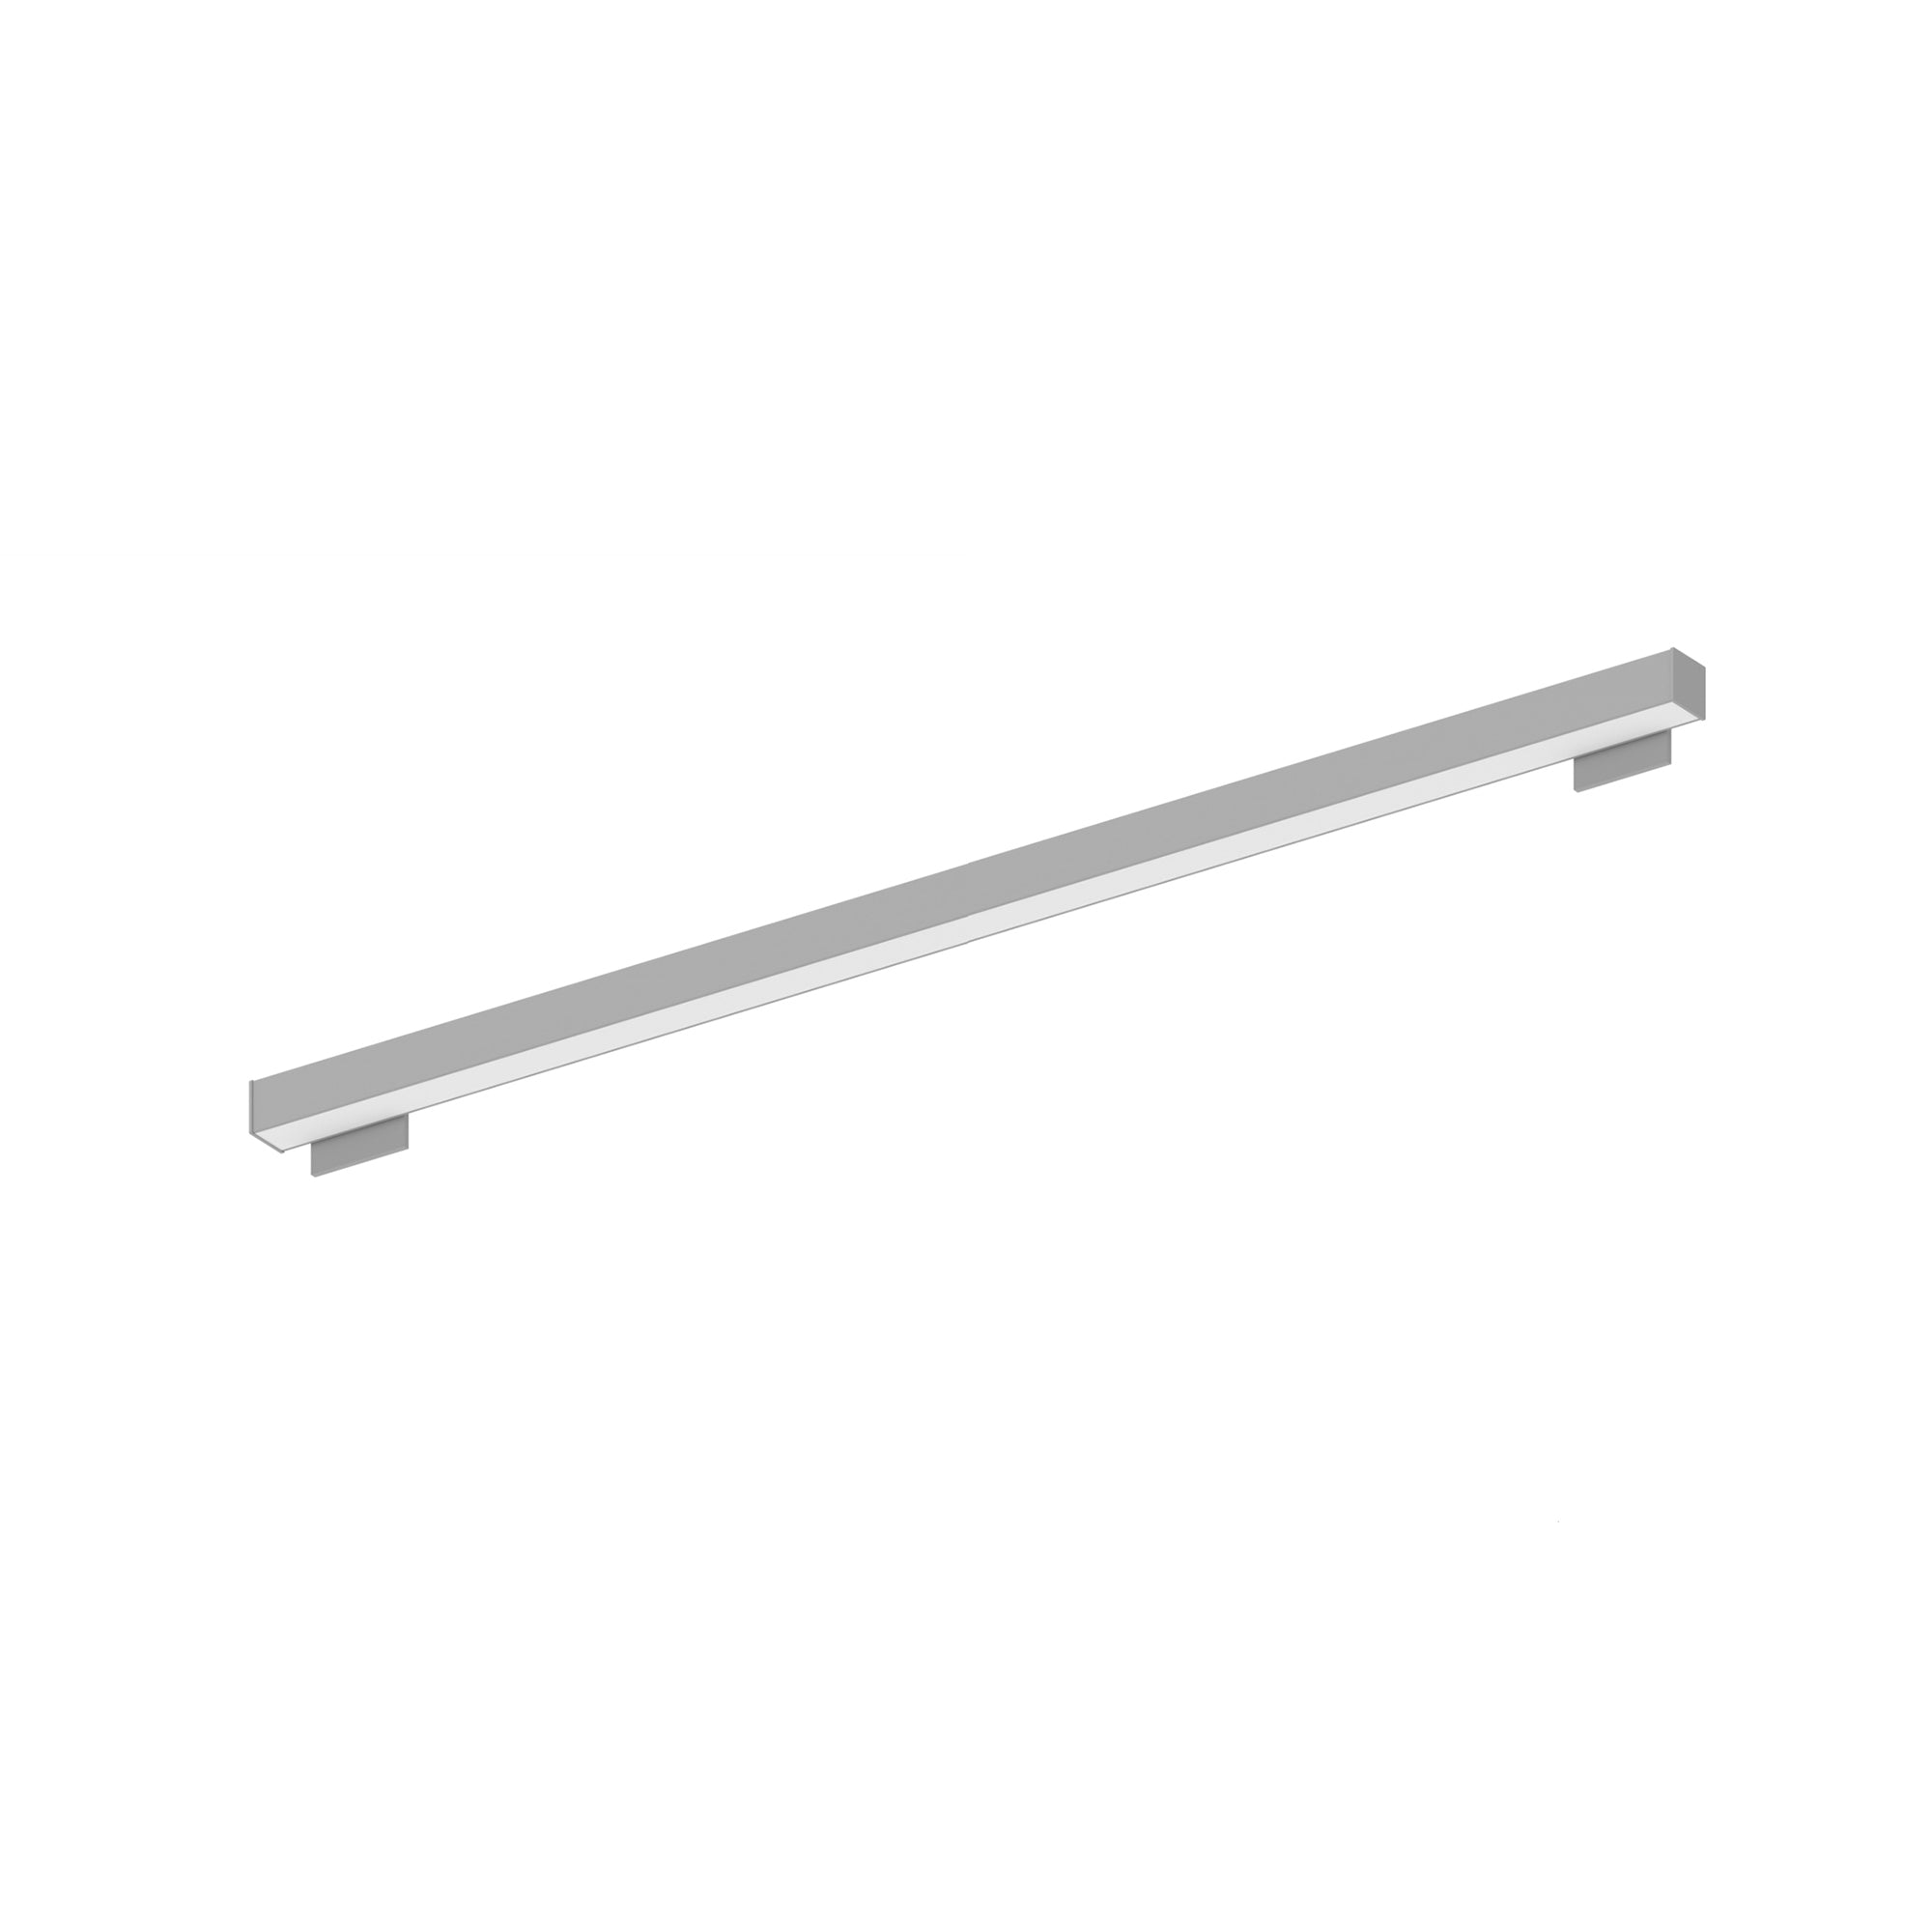 Nora Lighting NWLIN-81035A/L4-R4P - Linear - 8' L-Line LED Wall Mount Linear, 8400lm / 3500K, 4 Inchx4 Inch Left Plate & 4 Inchx4 Inch Right Plate, Right Power Feed, Aluminum Finish